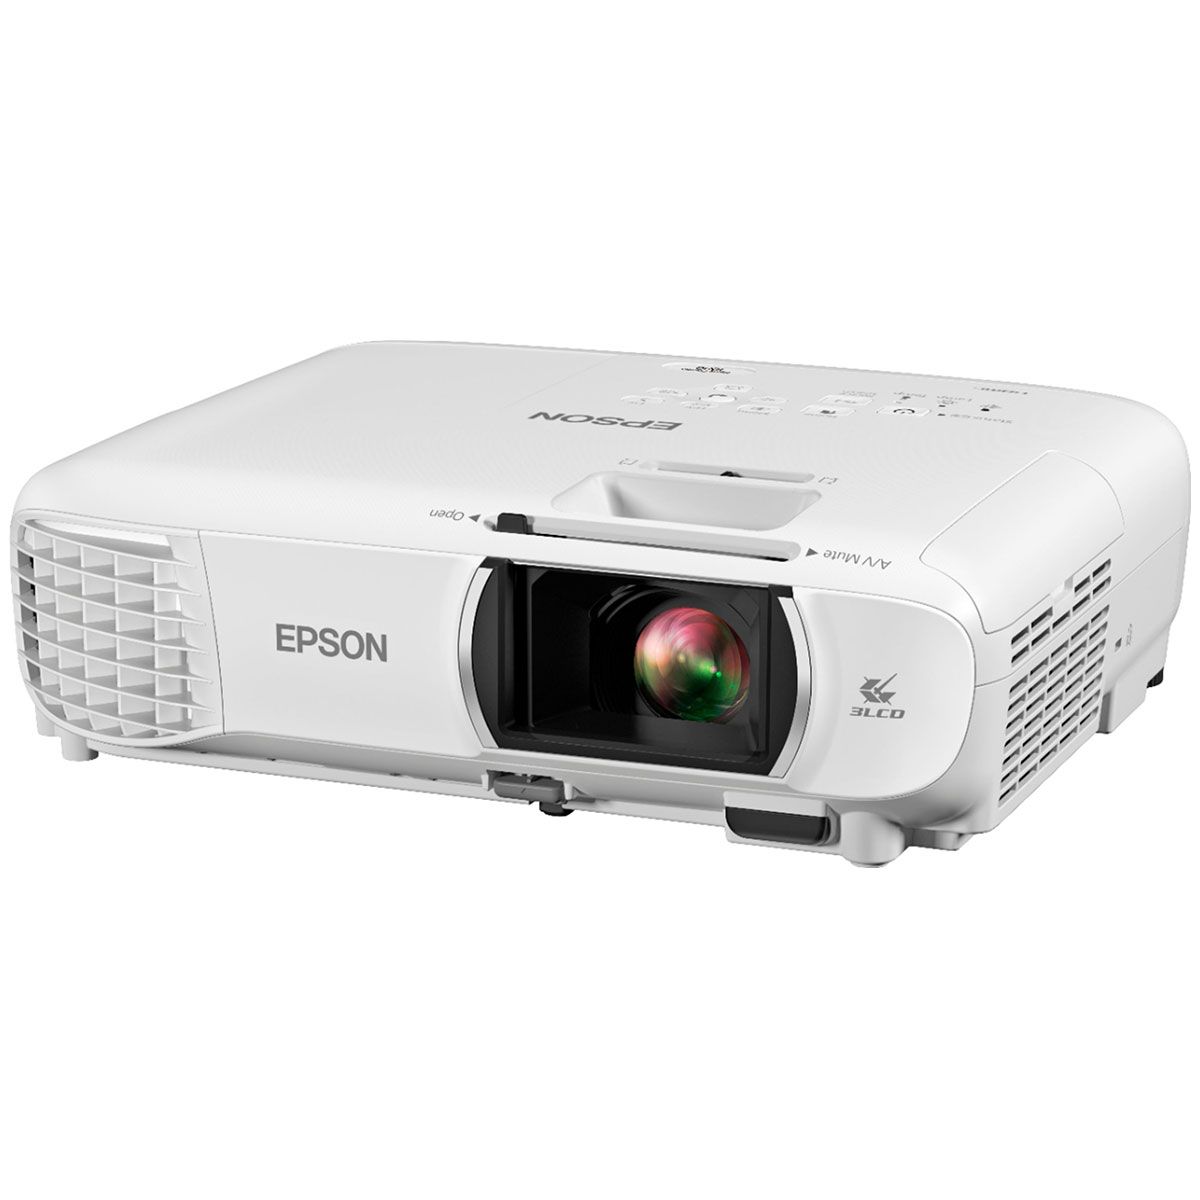 Epson 1080 Projector front side angle